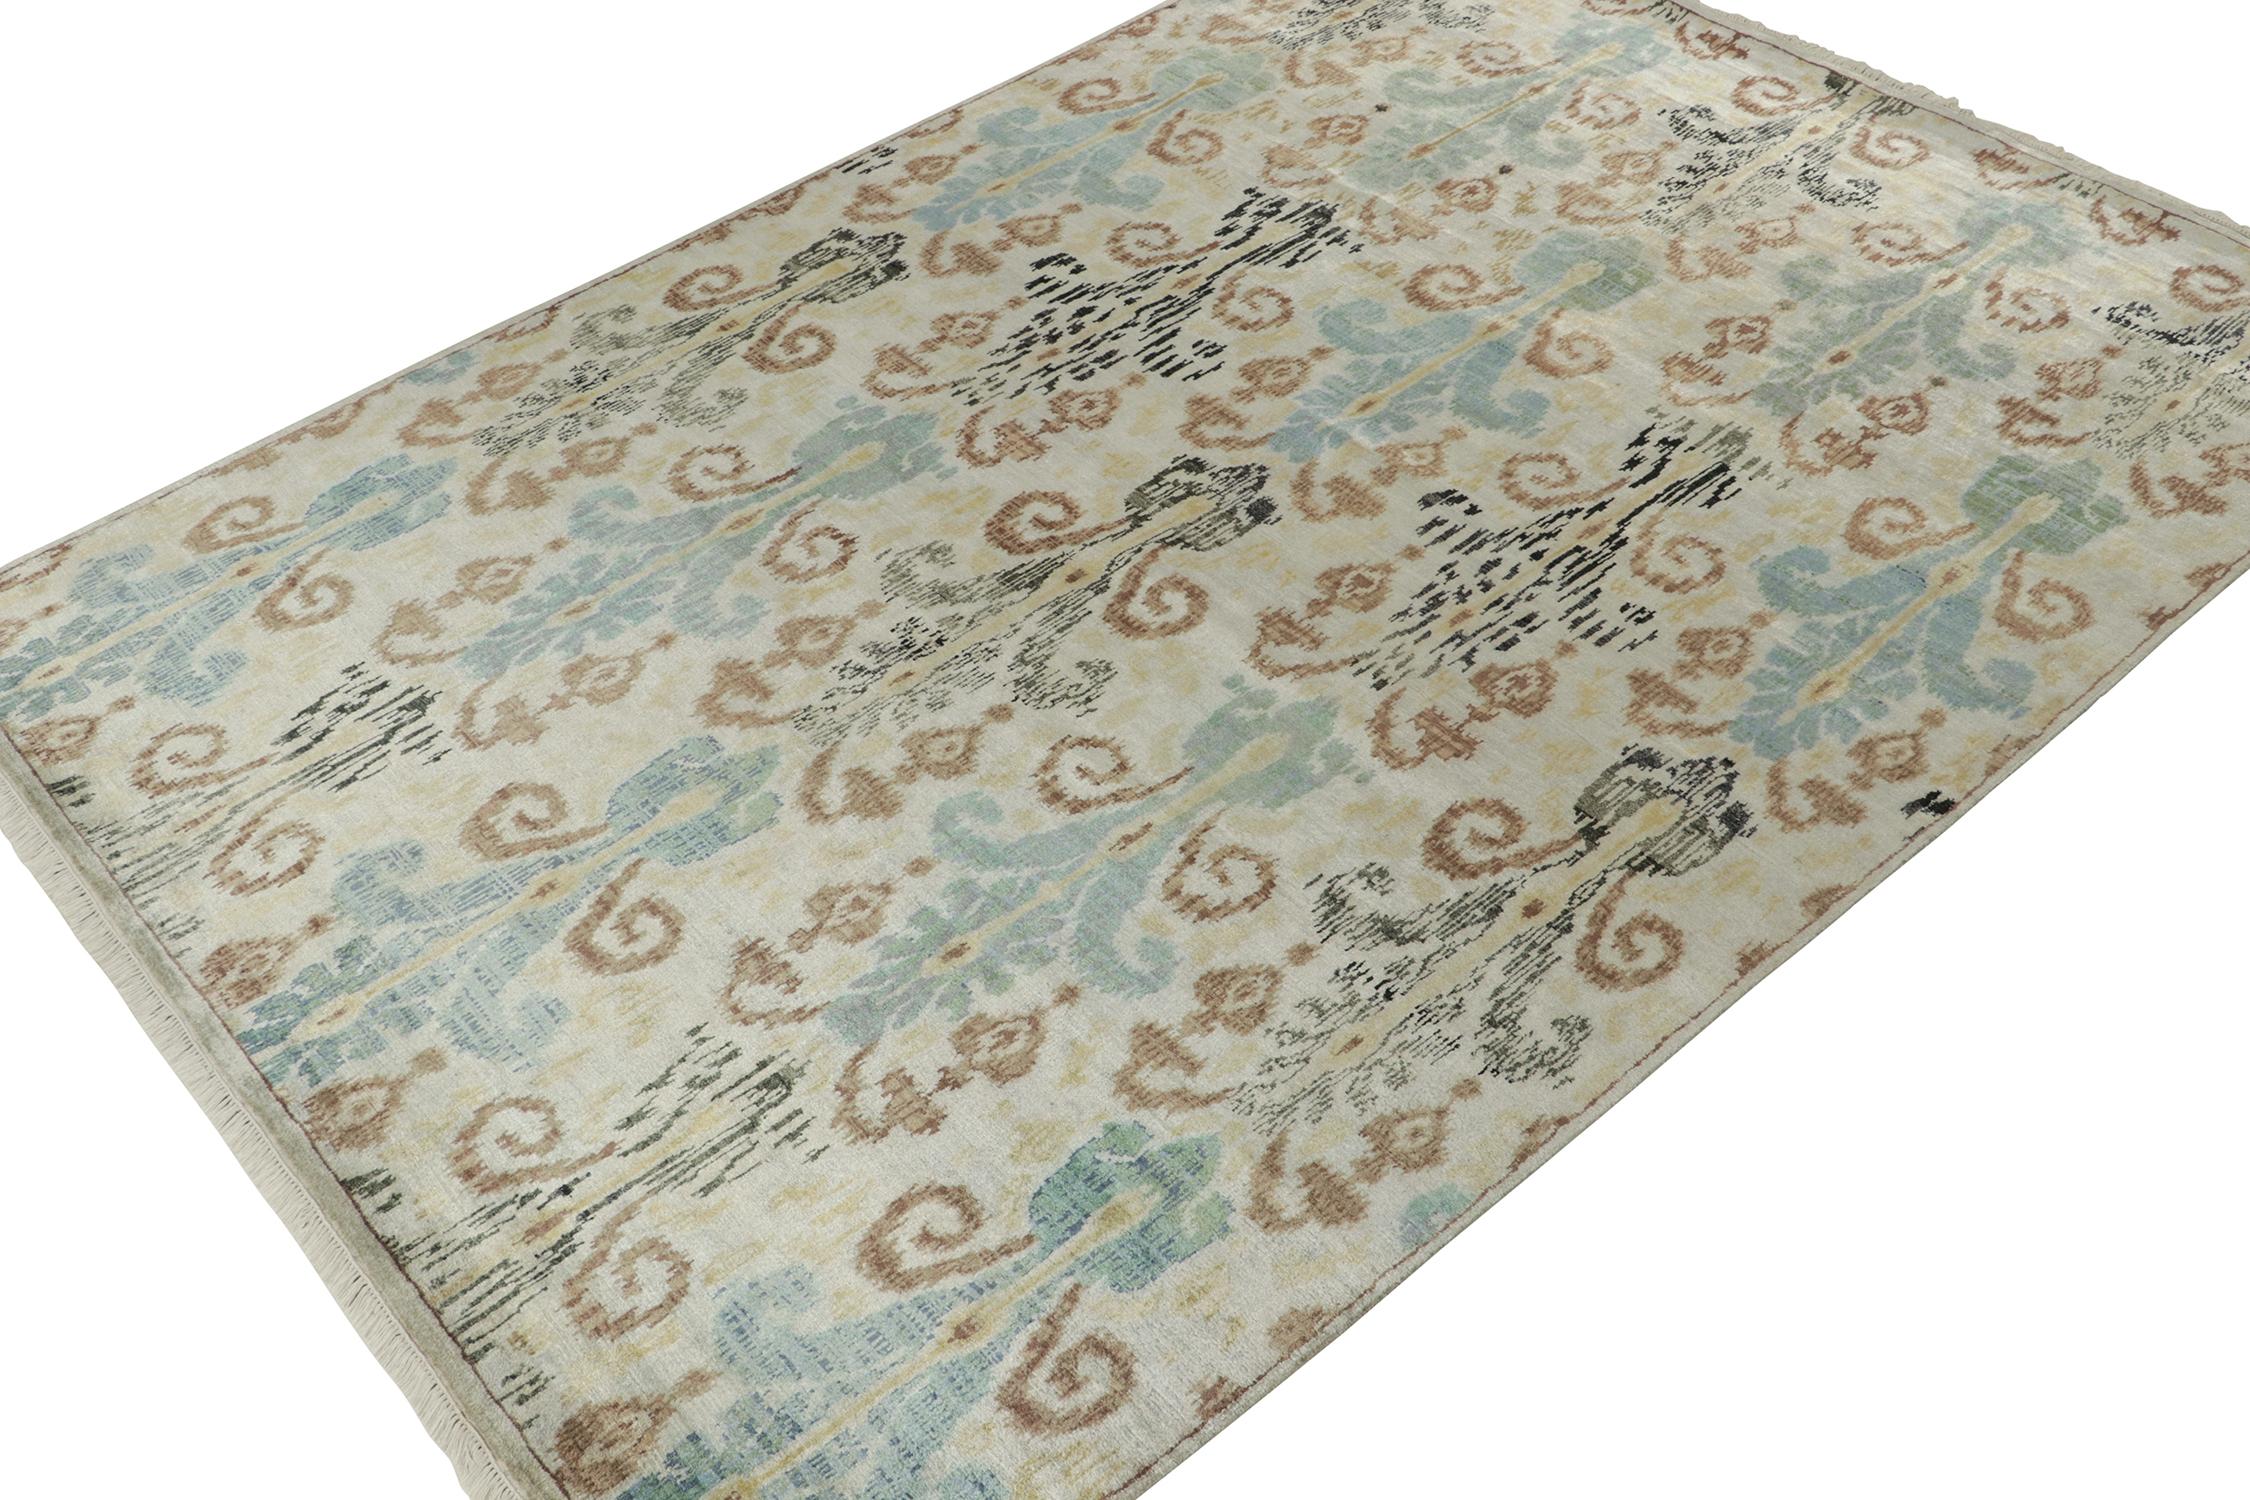 A 9x12 rug inspired from traditional rug styles, from Rug & Kilim’s Modern Classics Collection. Hand-knotted in wool, playing an exceptional blue beside beige-brown in repeated patterns with classic grace.
Further On the Design:
The emphasis of